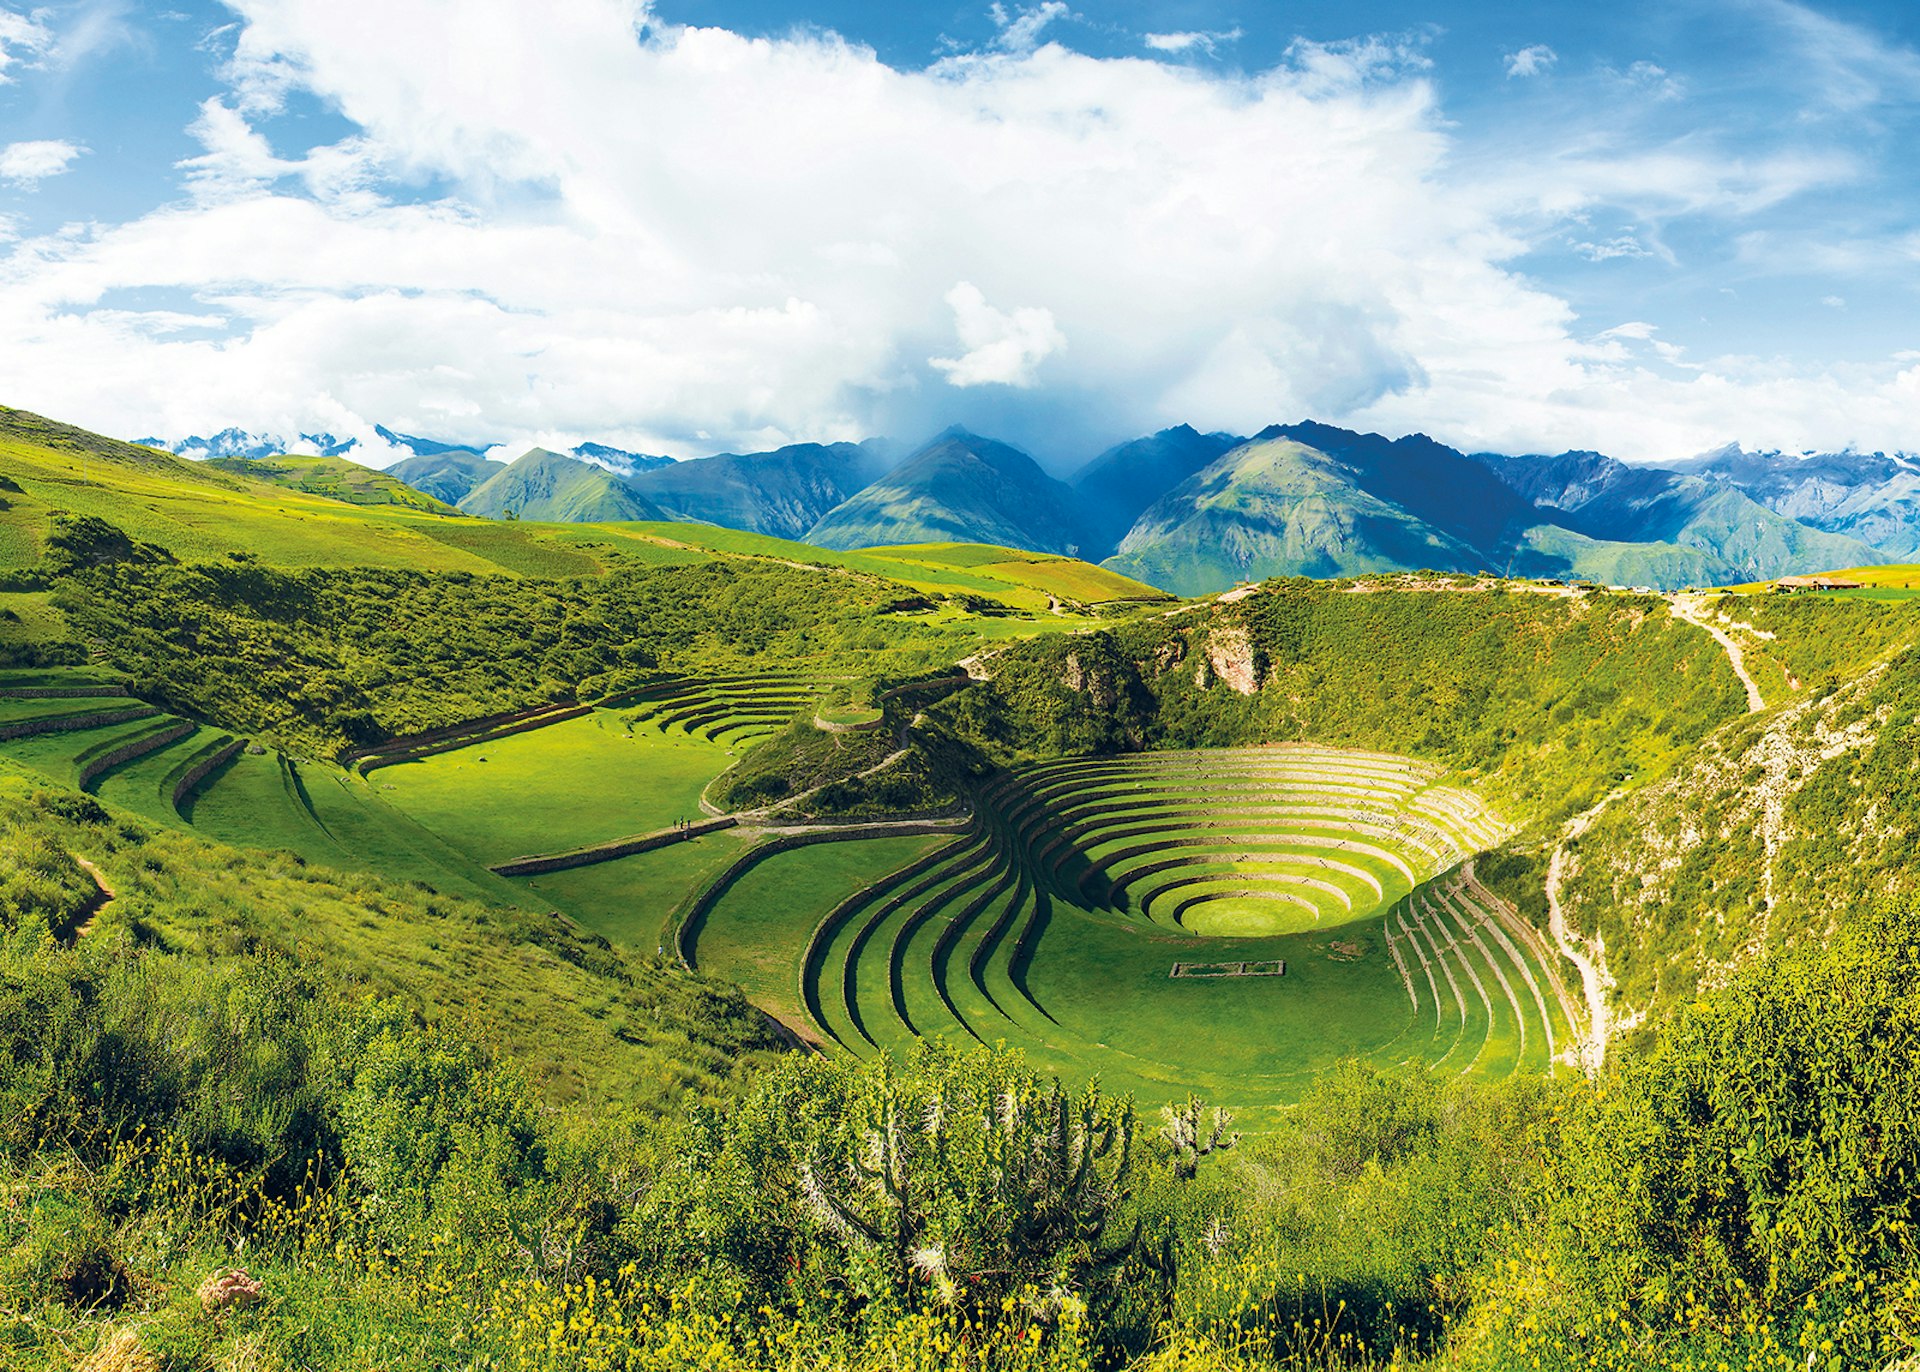 The concentric terraces of Moray, Peru © Panoramic Images / Getty Images